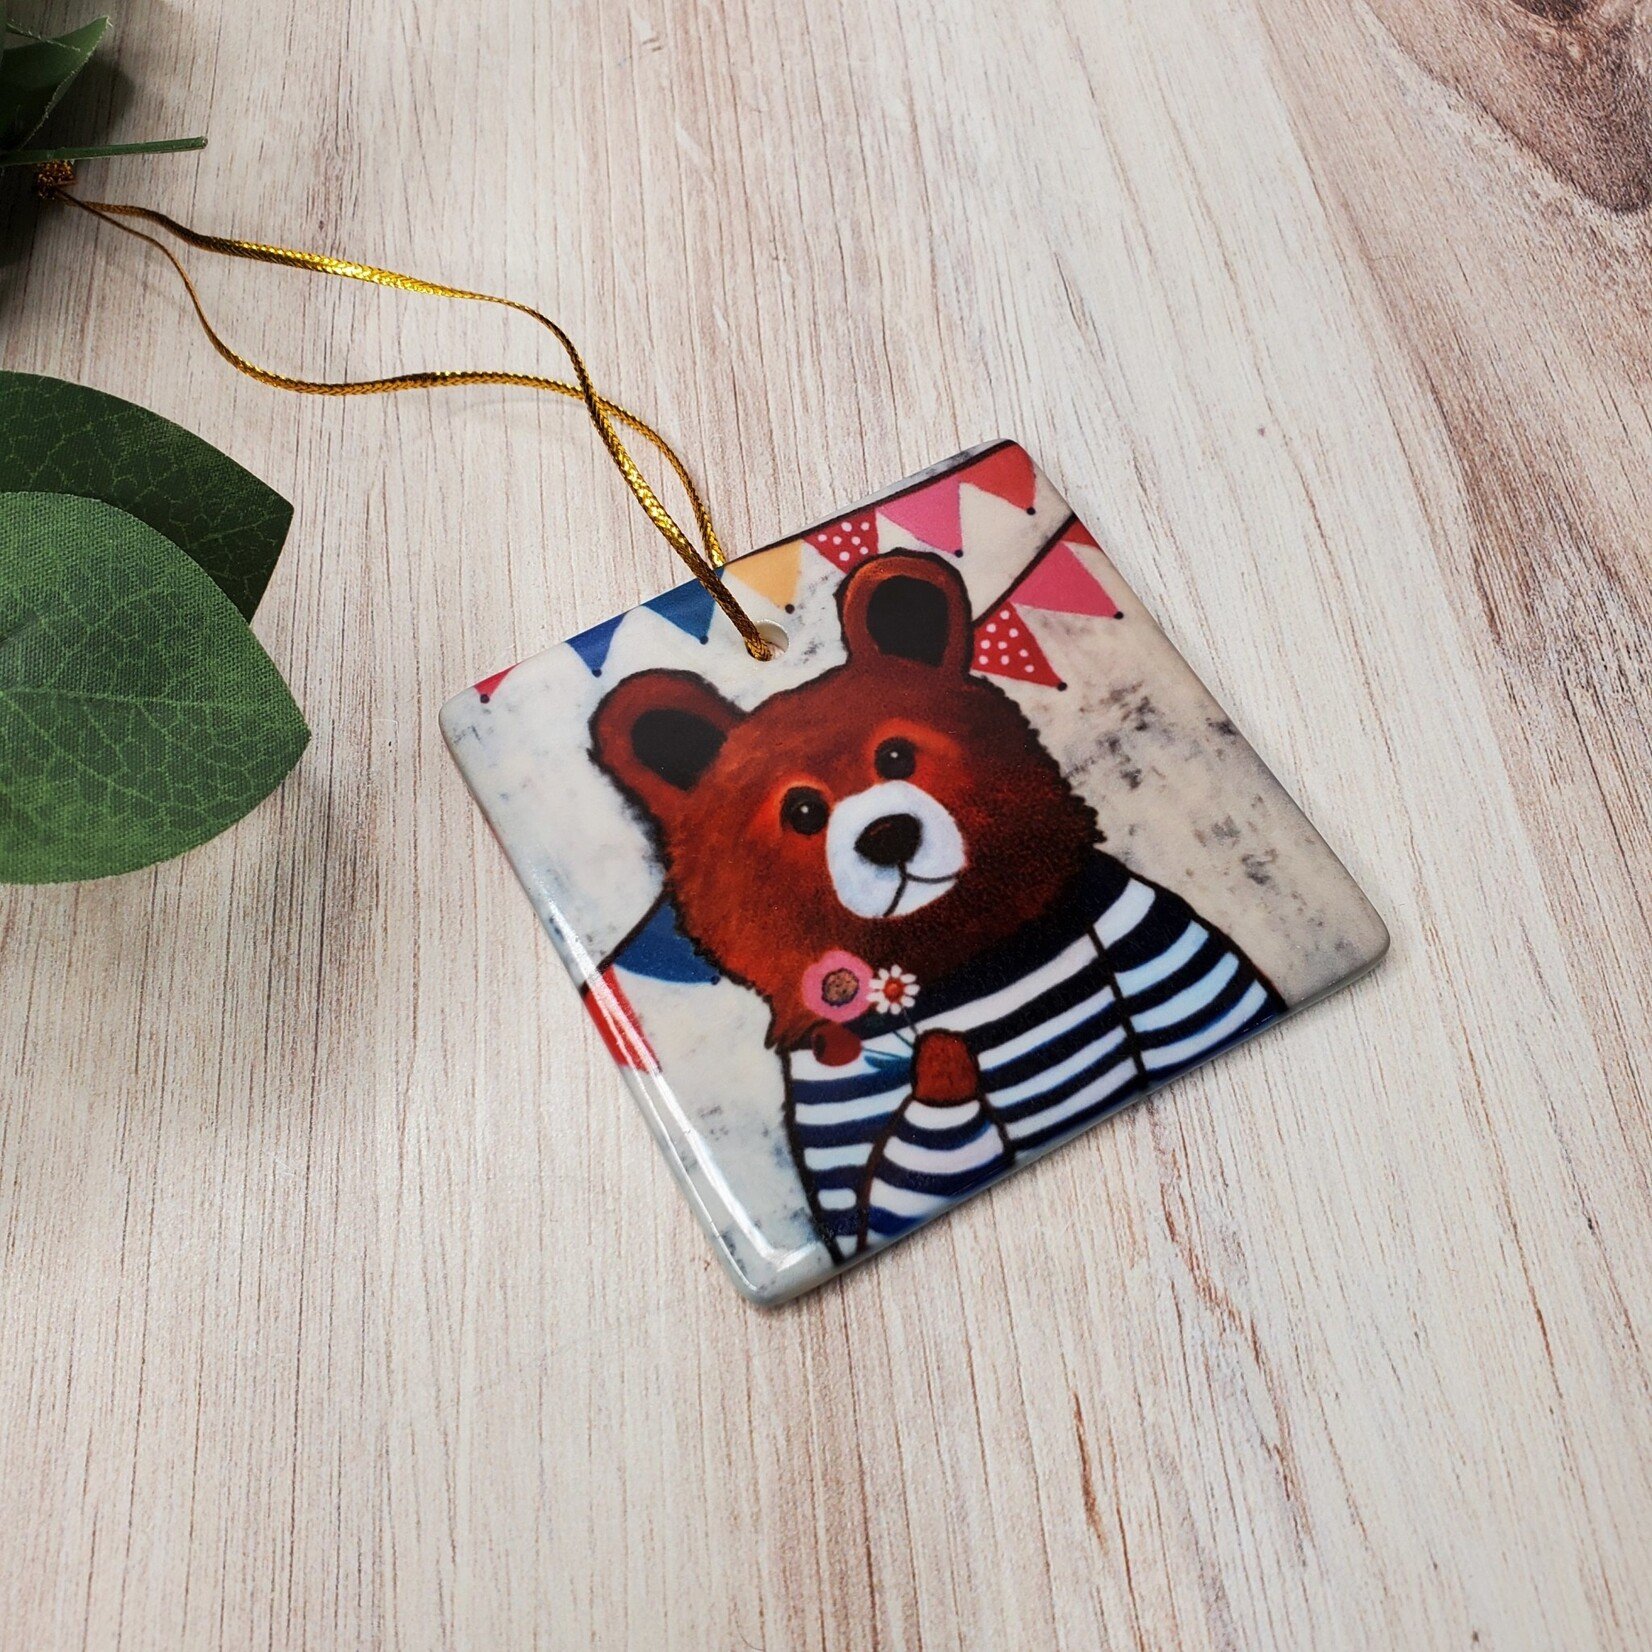 Chilipepper's Painting Ceramic Art Ornament - Party Bear